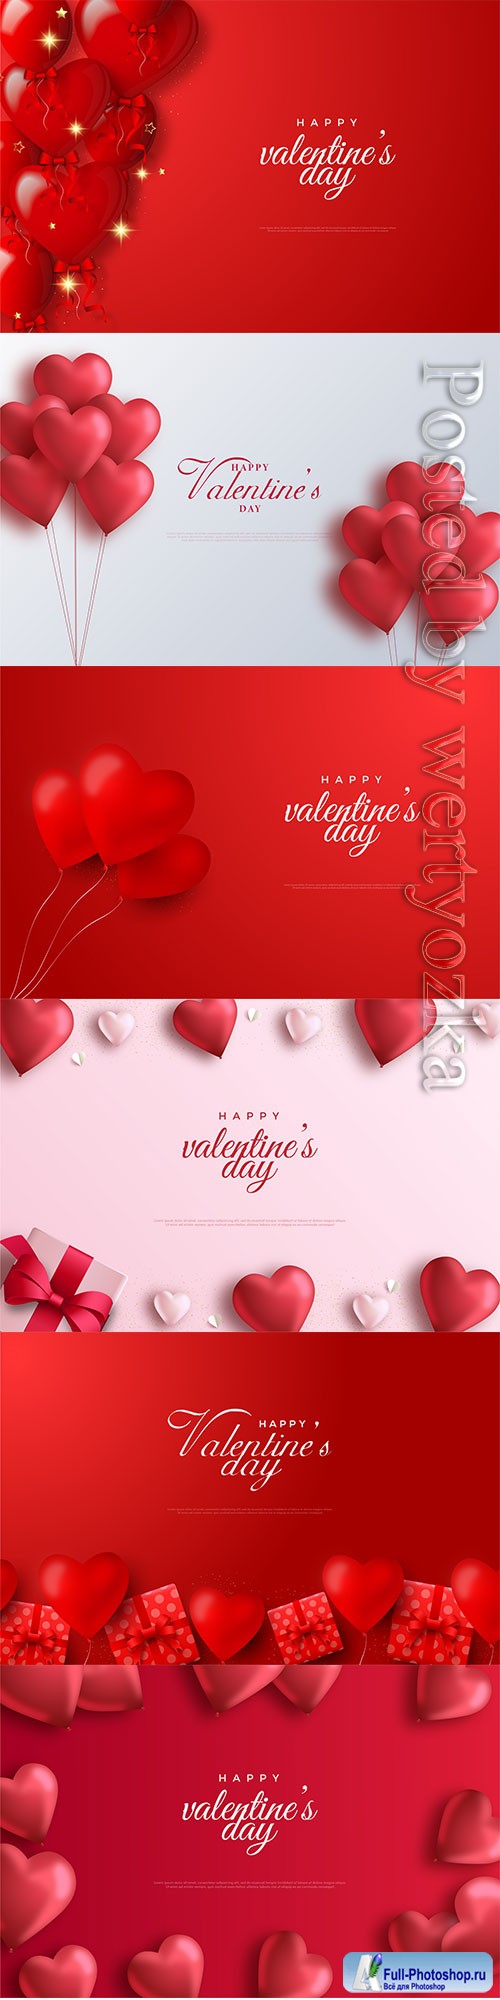 Valentine day vector background with red balloons